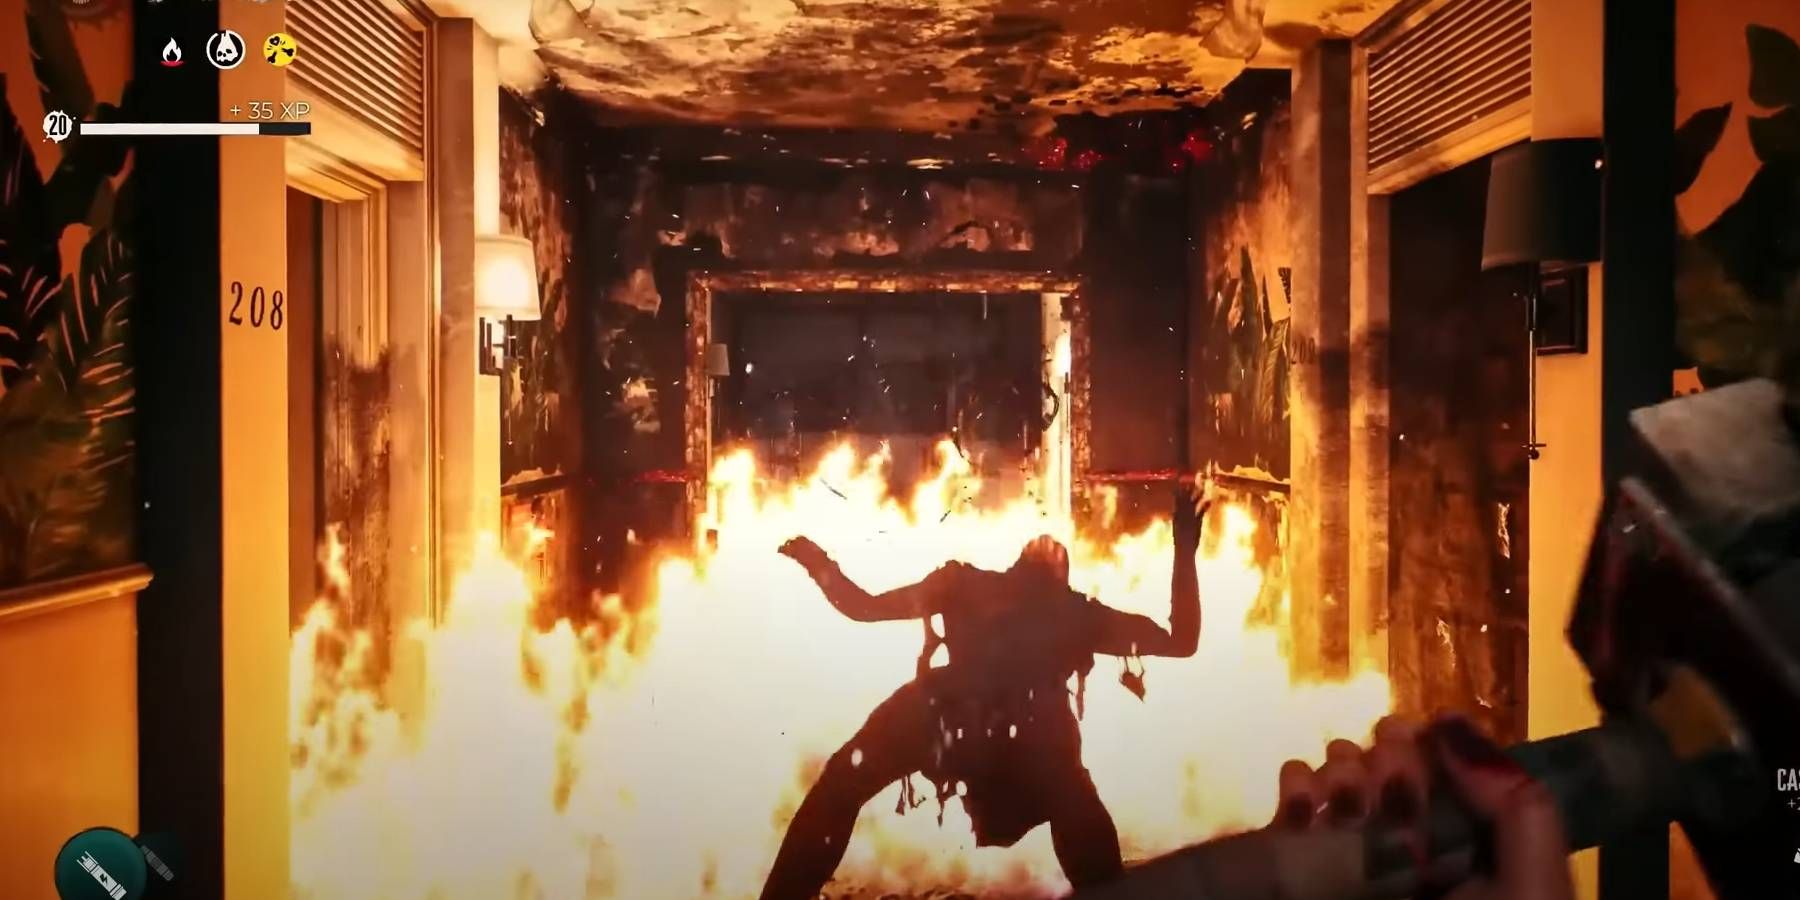 Dead Island 2 Burning Hallway and Zombie Variant that Drops Flammable Fluid on Defeat